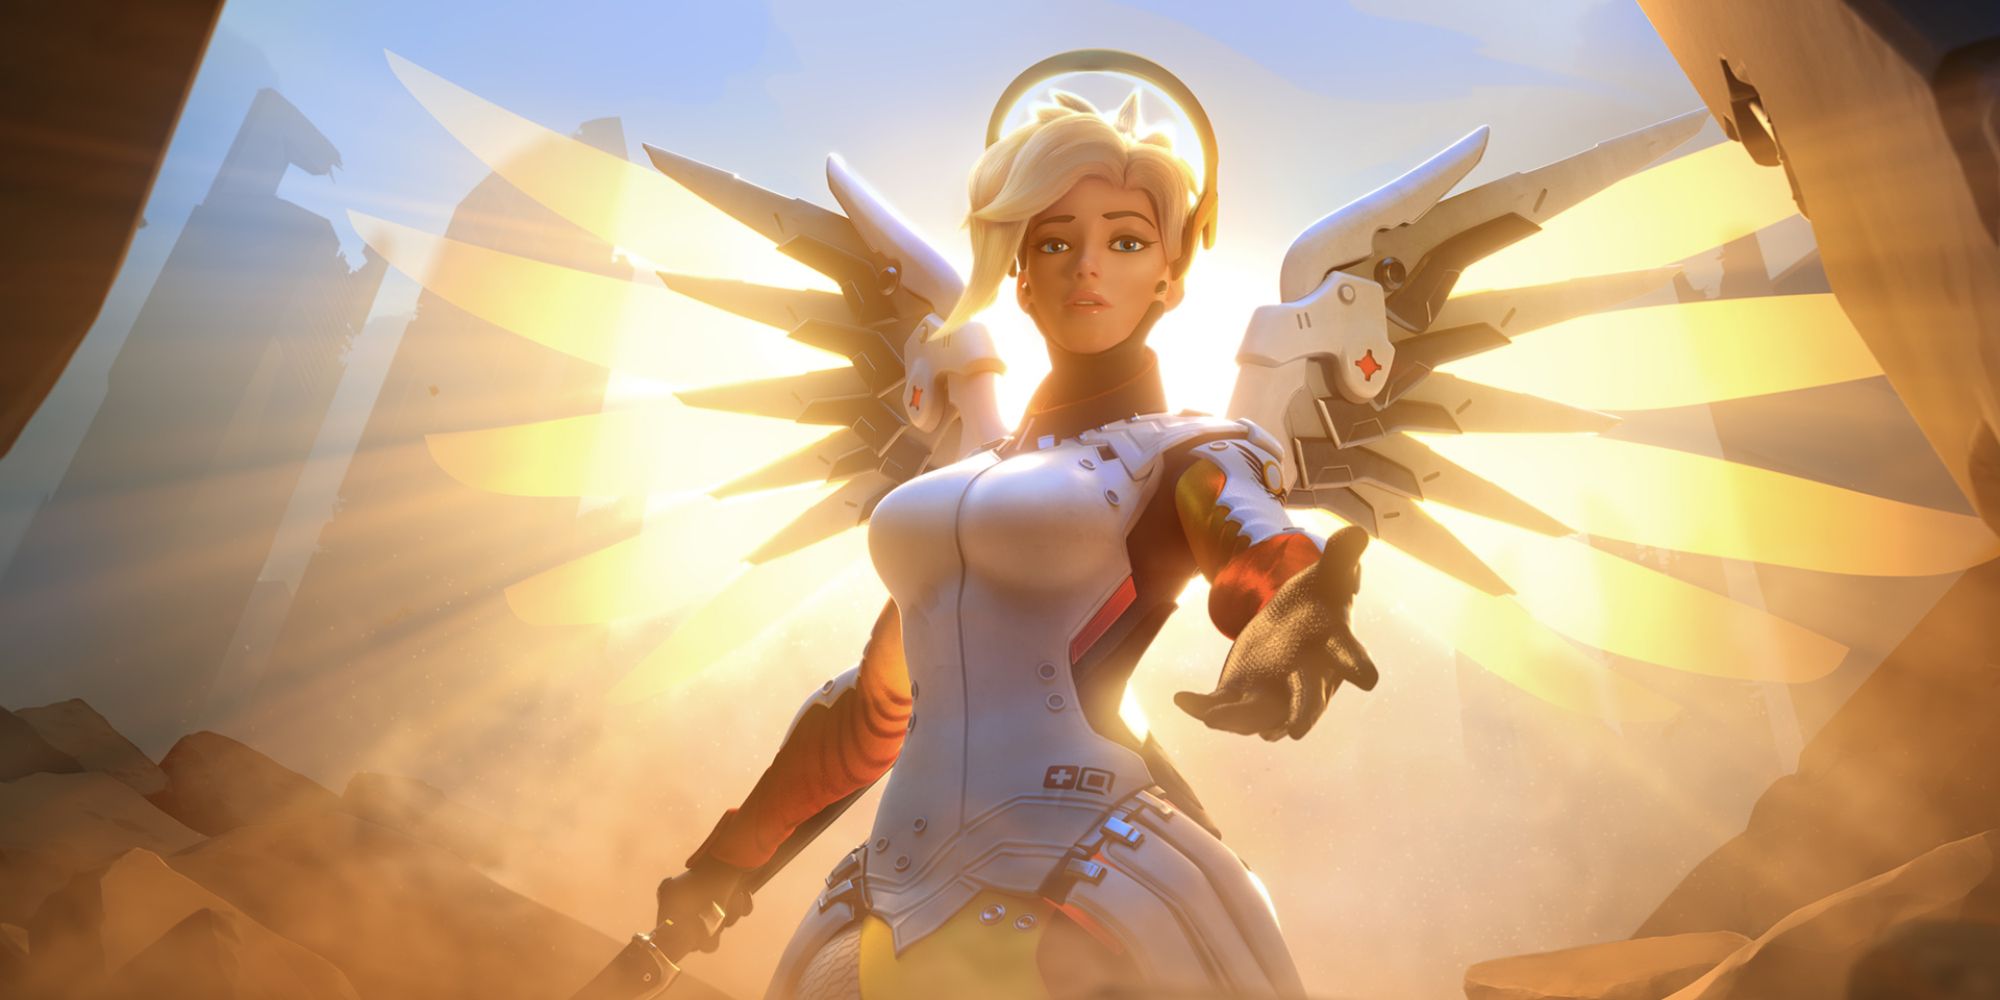 A photo of Mercy from Overwatch, flying down on glowing yellow wings and holding out her hand to help someone. 